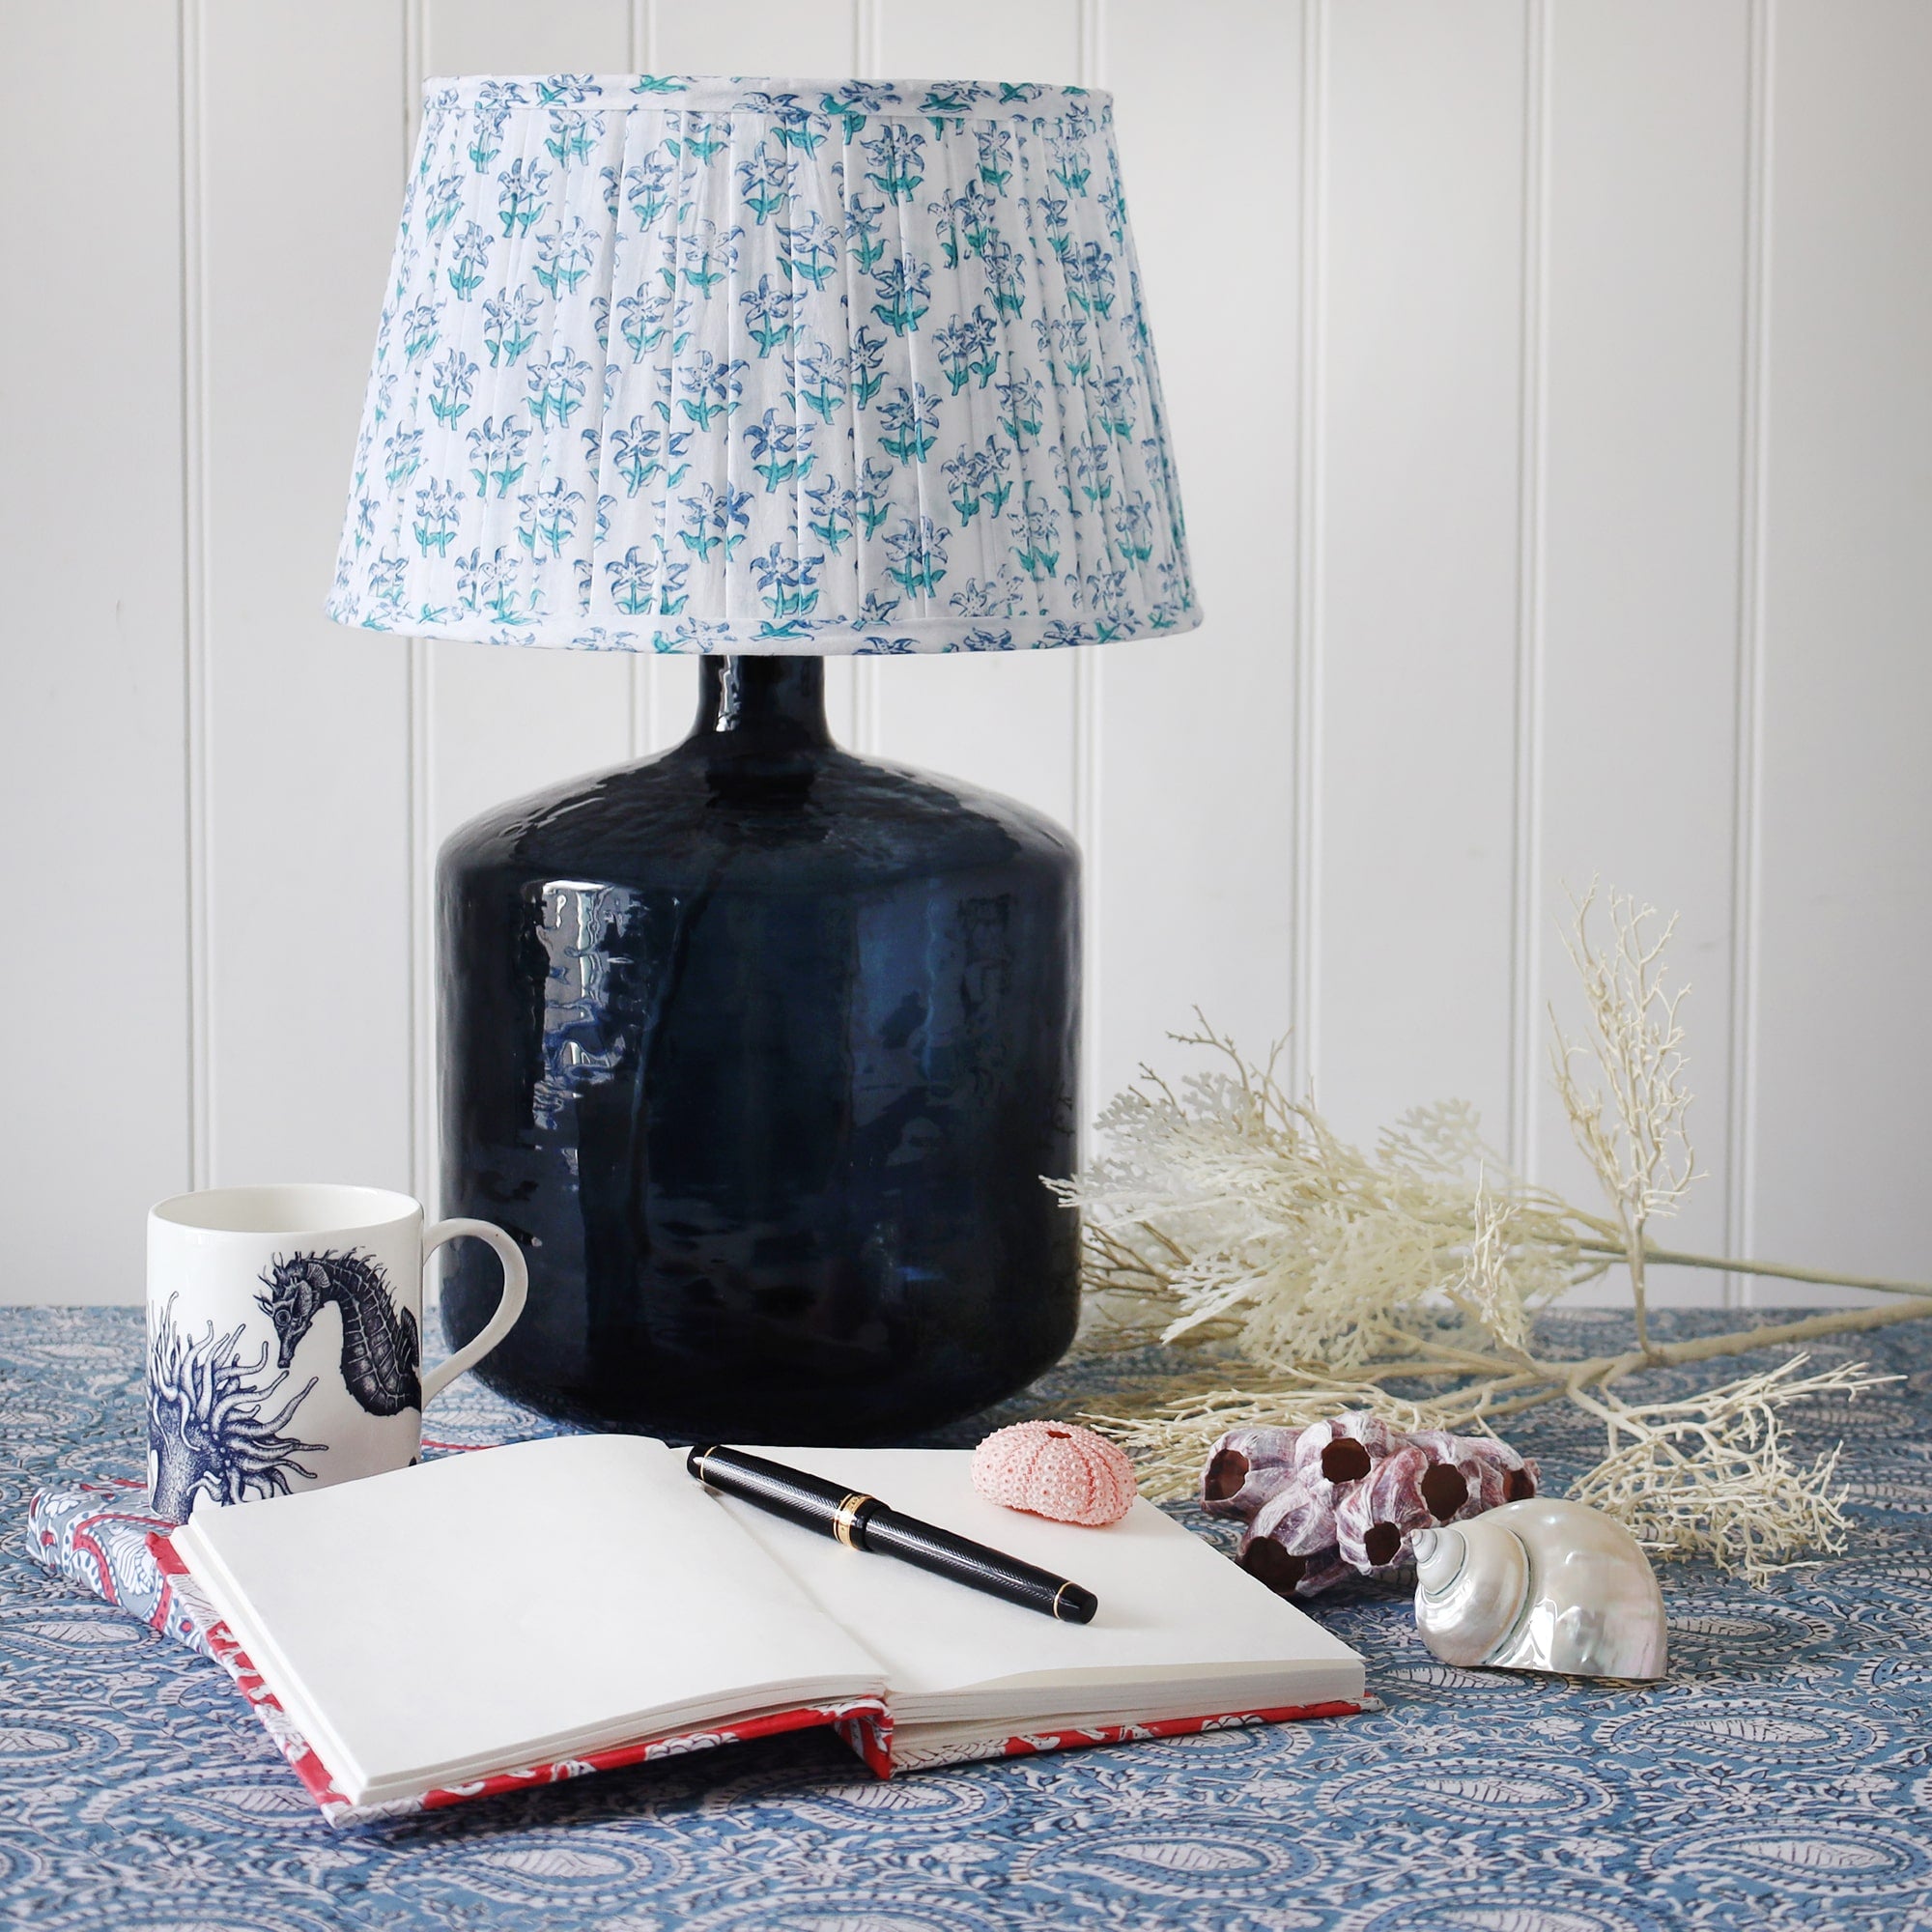 Medium pleated lampshade in hand blocked print in blue and white in our seastar design on a dark blue glass lampbase placed on a table.On the table is notebooks and a pen next to a seahorse mug and some fauna next to the lampbase